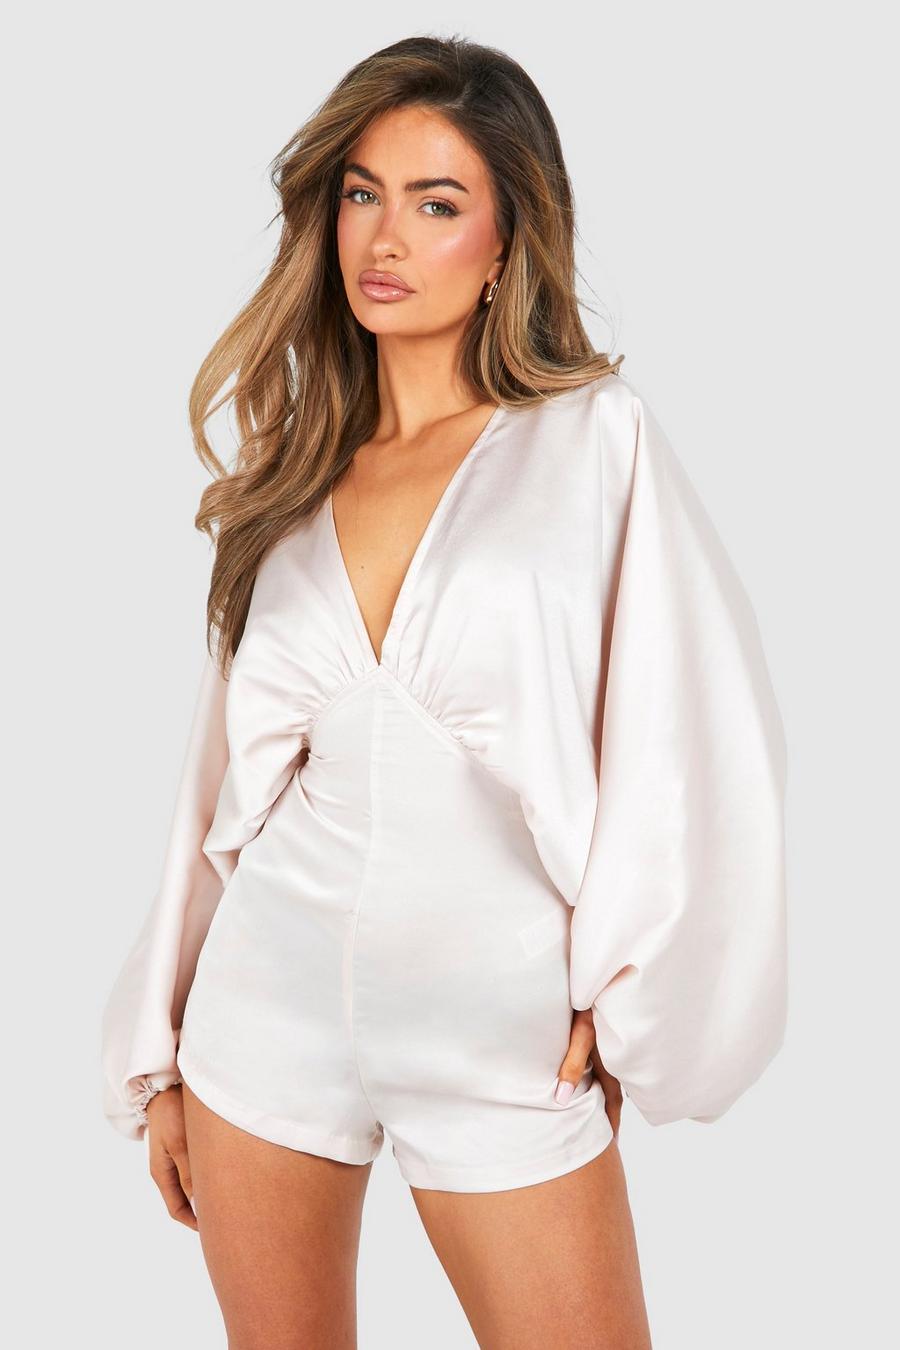 Champagne Matte Satin Extreme Sleeve Playsuit